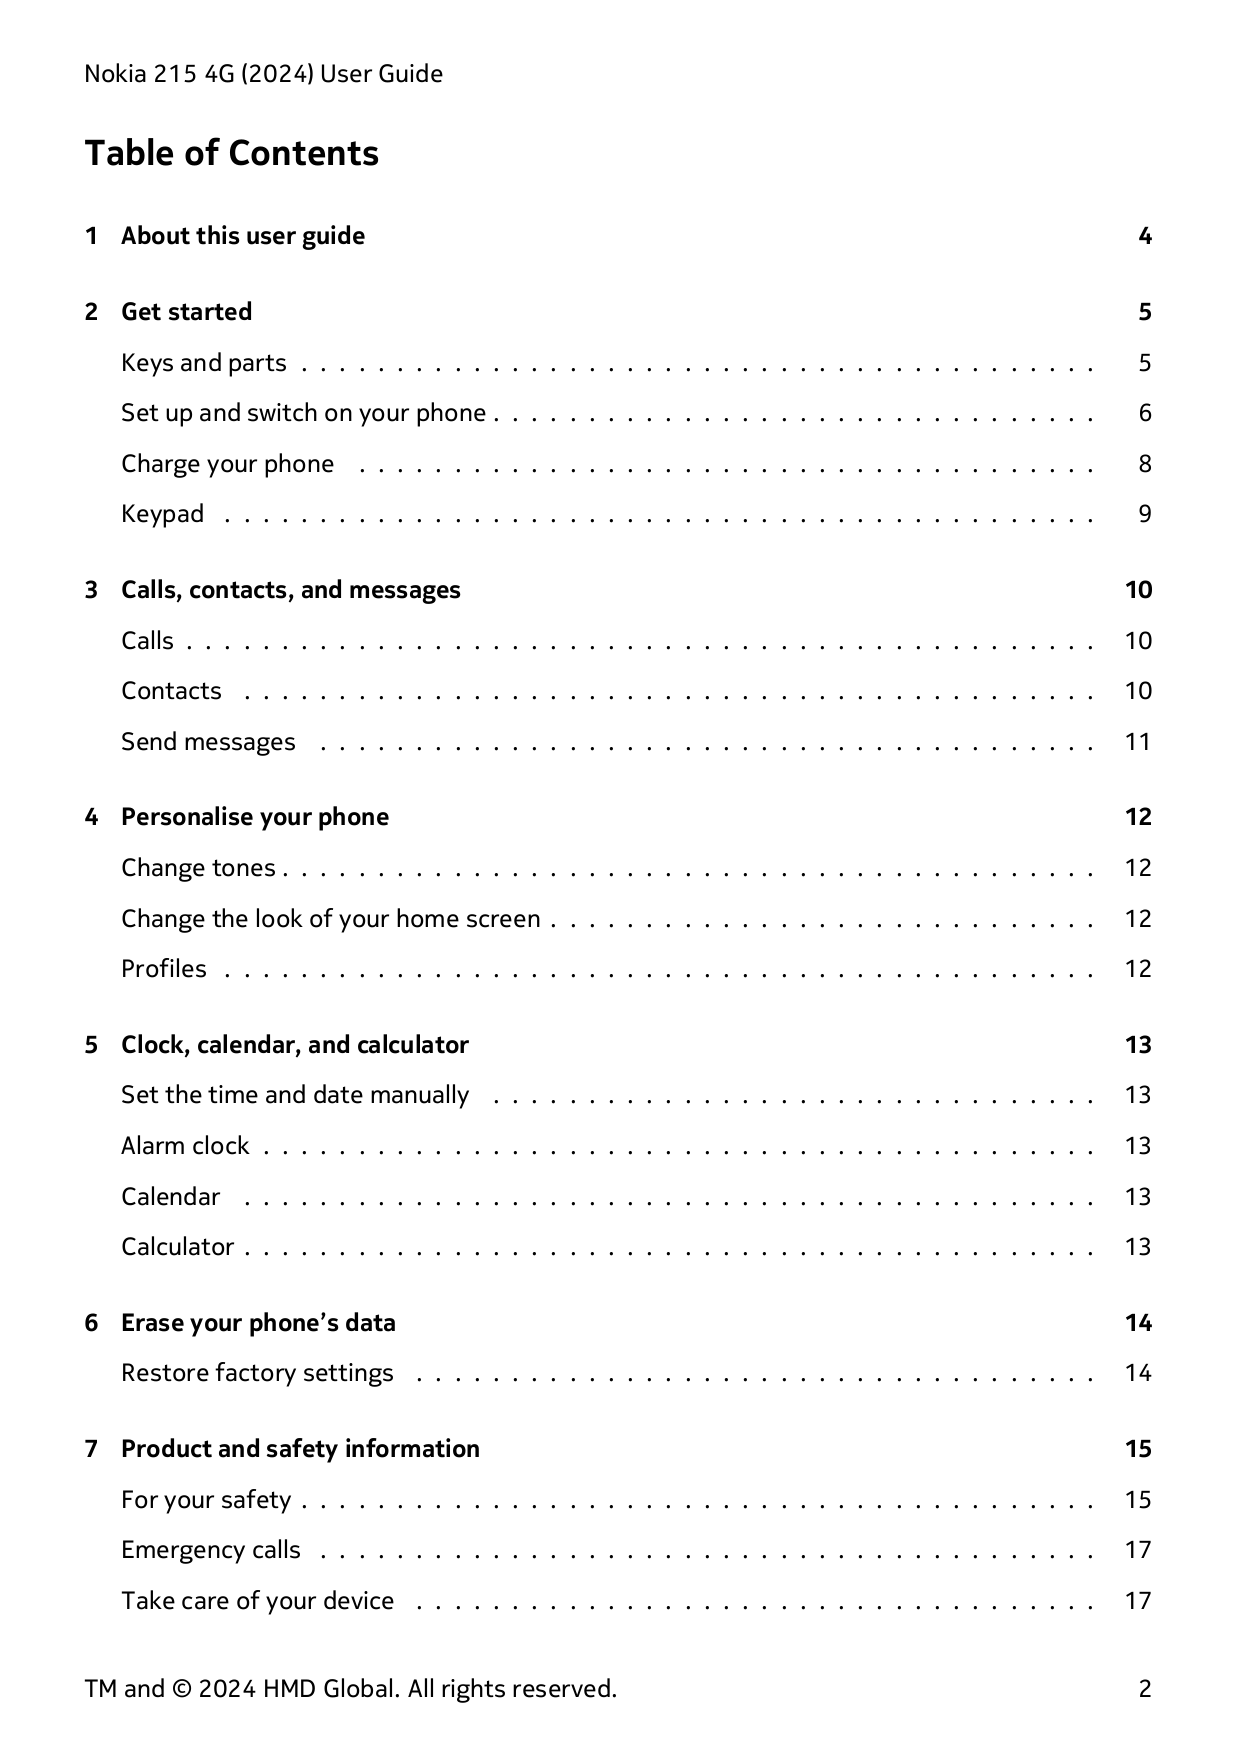 Nokia 215 4G (2024) User GuideTable of Contents1 About this user guide42 Get started5Keys and parts . . . . . . . . . . . . . . 